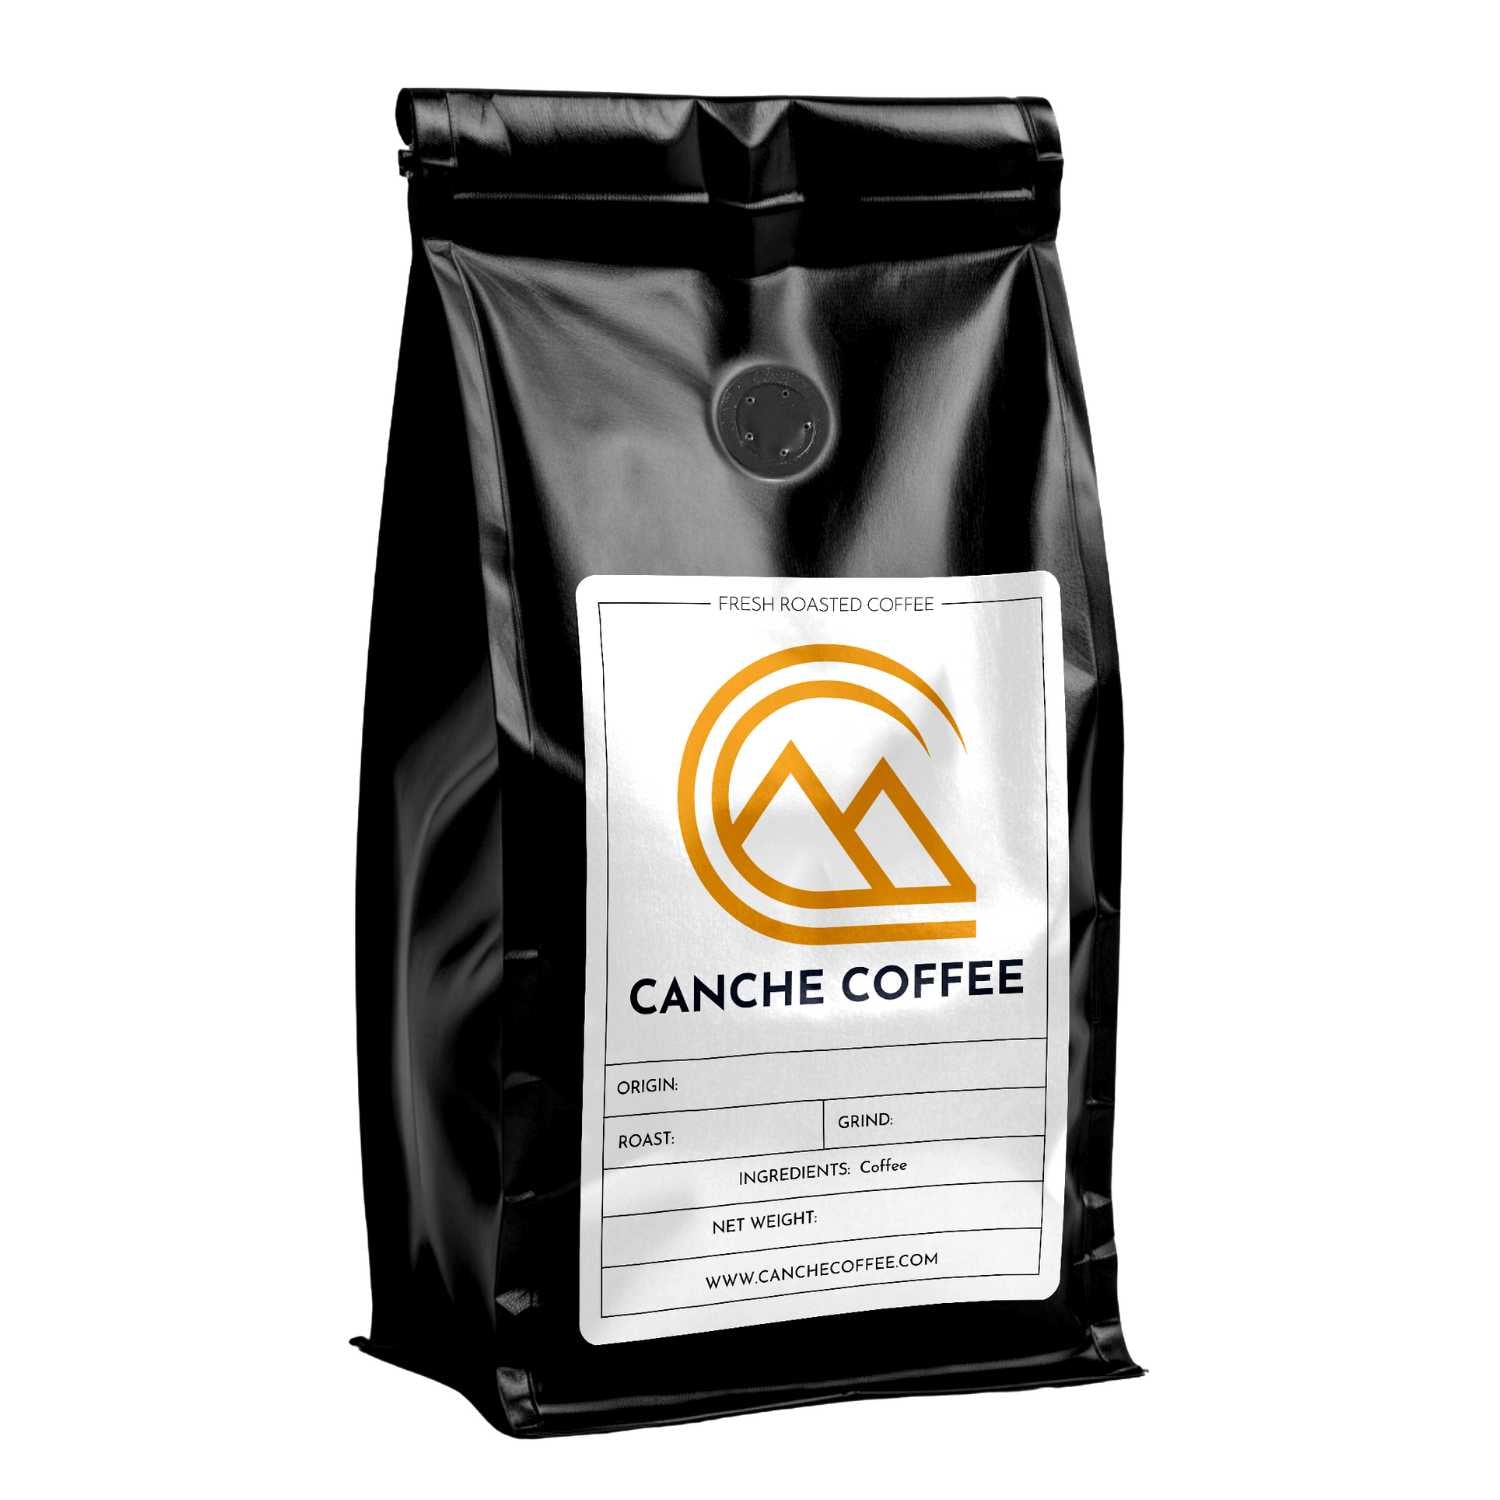 Half Caff Blend - Canche Coffee